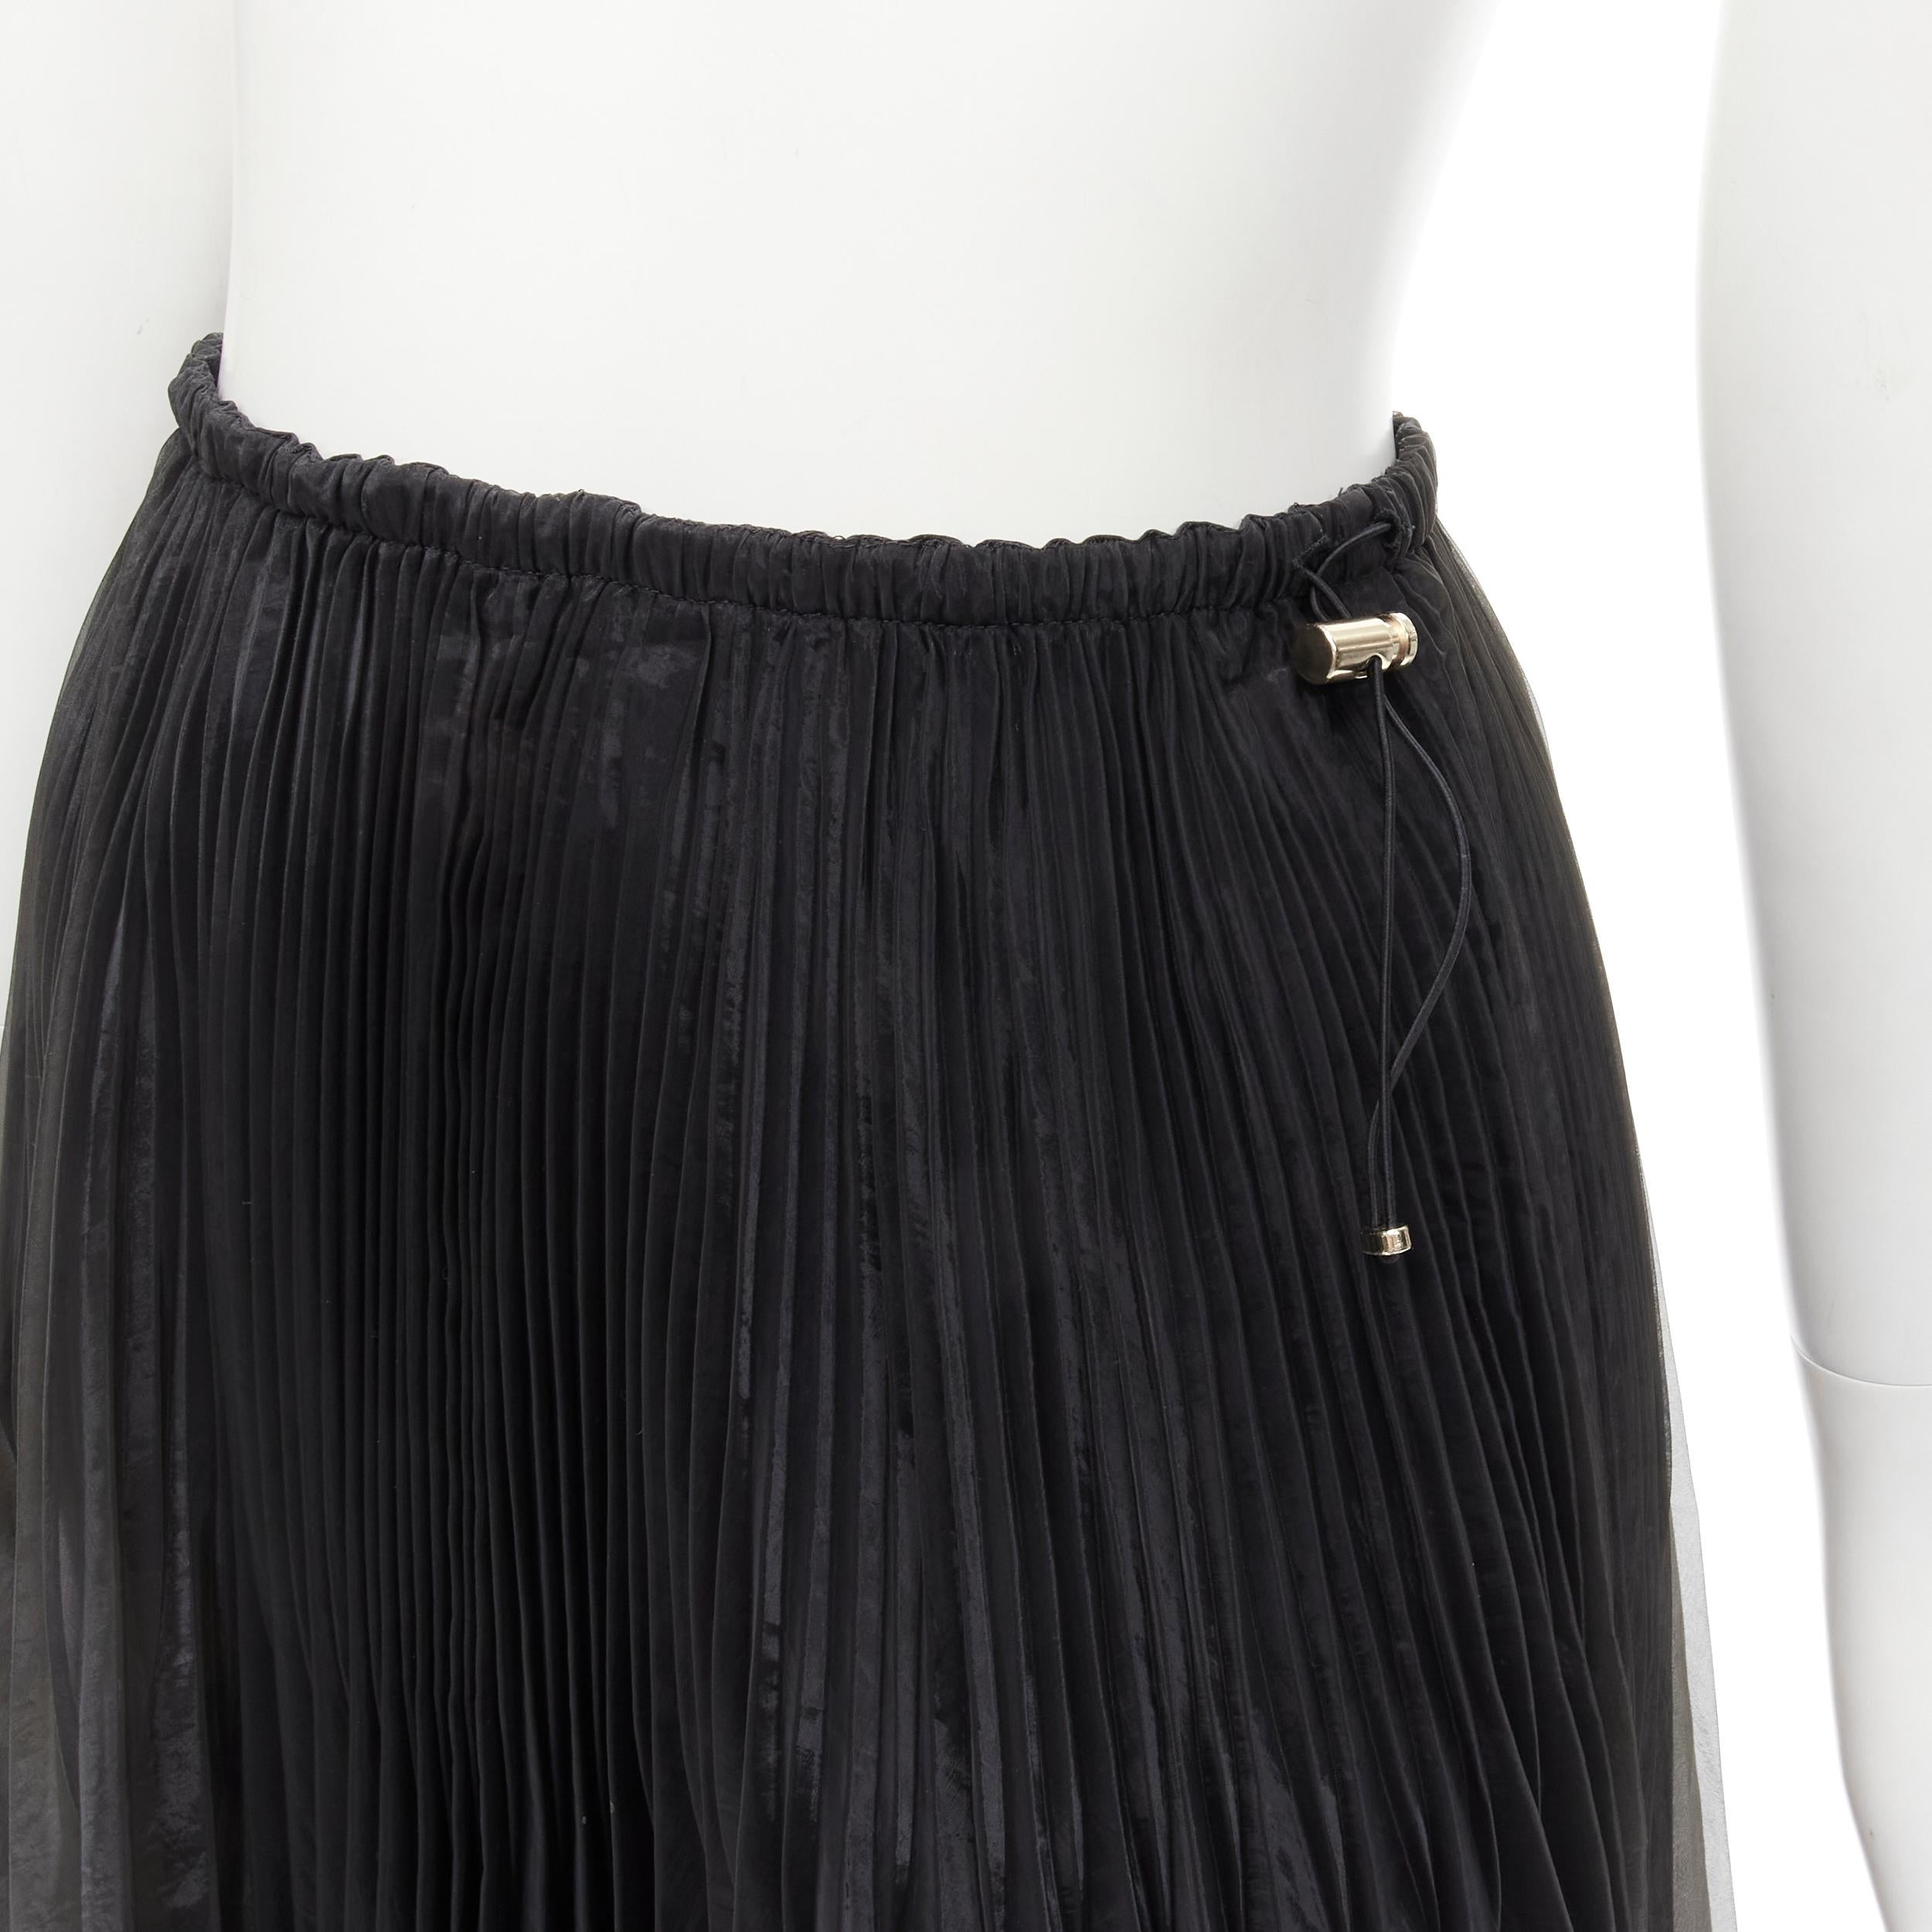 FENDI toggle drawstring waist pleated flared midi skirt IT36 XS
Brand: Fendi
Extra Detail: Gold-tone toggle at side of waist. Fully lined.

CONDITION:
Condition: Excellent, this item was pre-owned and is in excellent condition. 

SIZING:
Designer